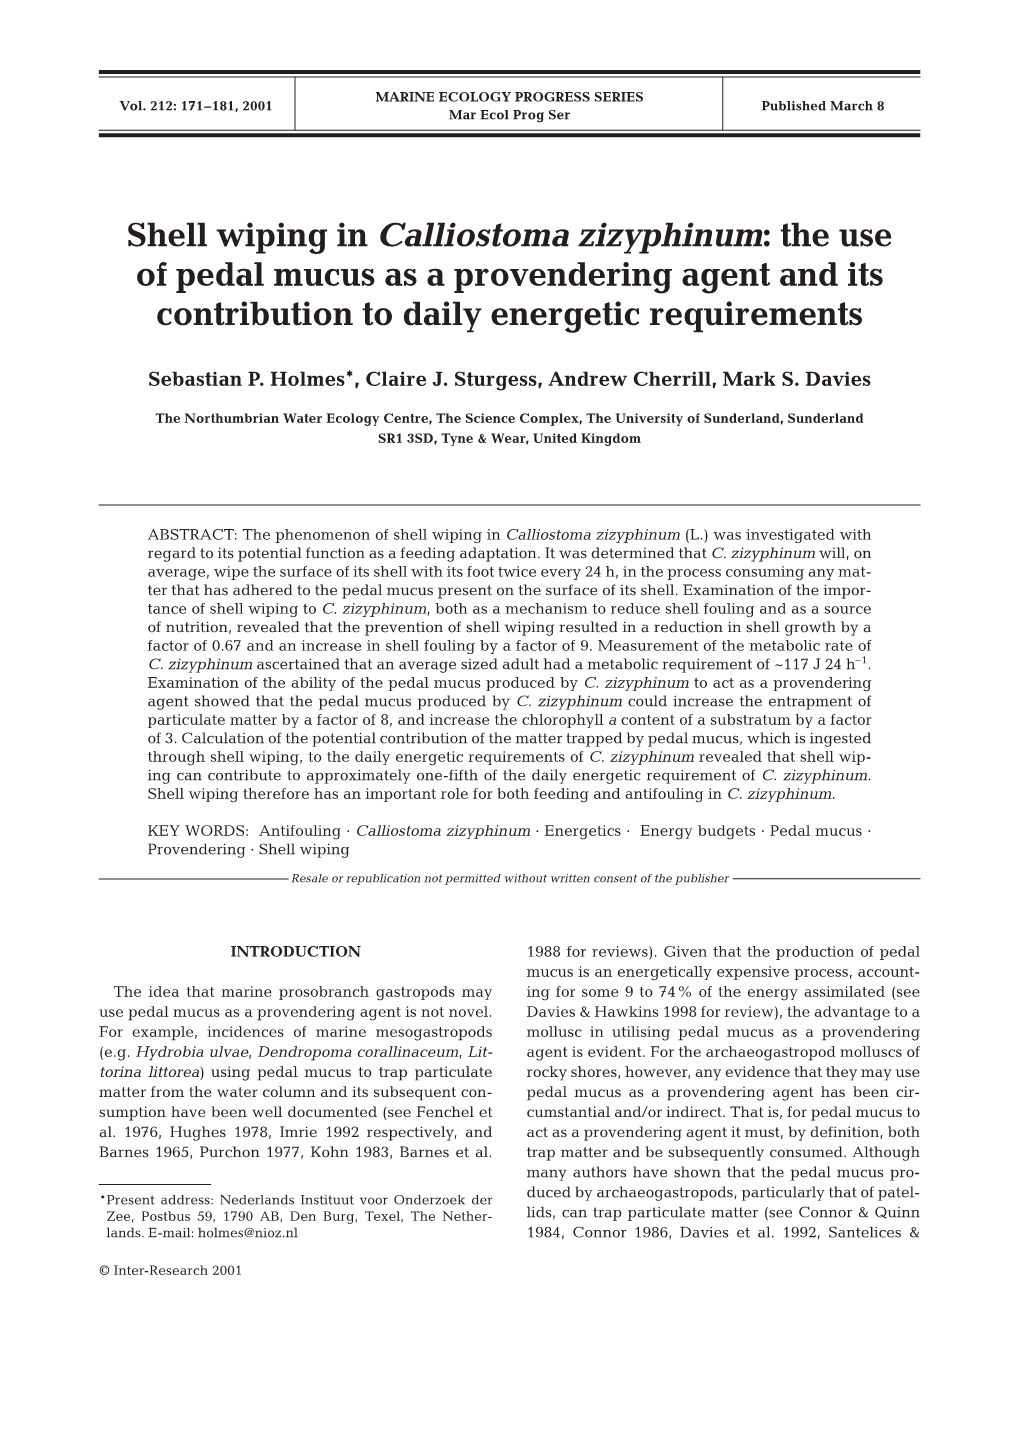 Shell Wiping in Calliostoma Zizyphinum: the Use of Pedal Mucus As a Provendering Agent and Its Contribution to Daily Energetic Requirements